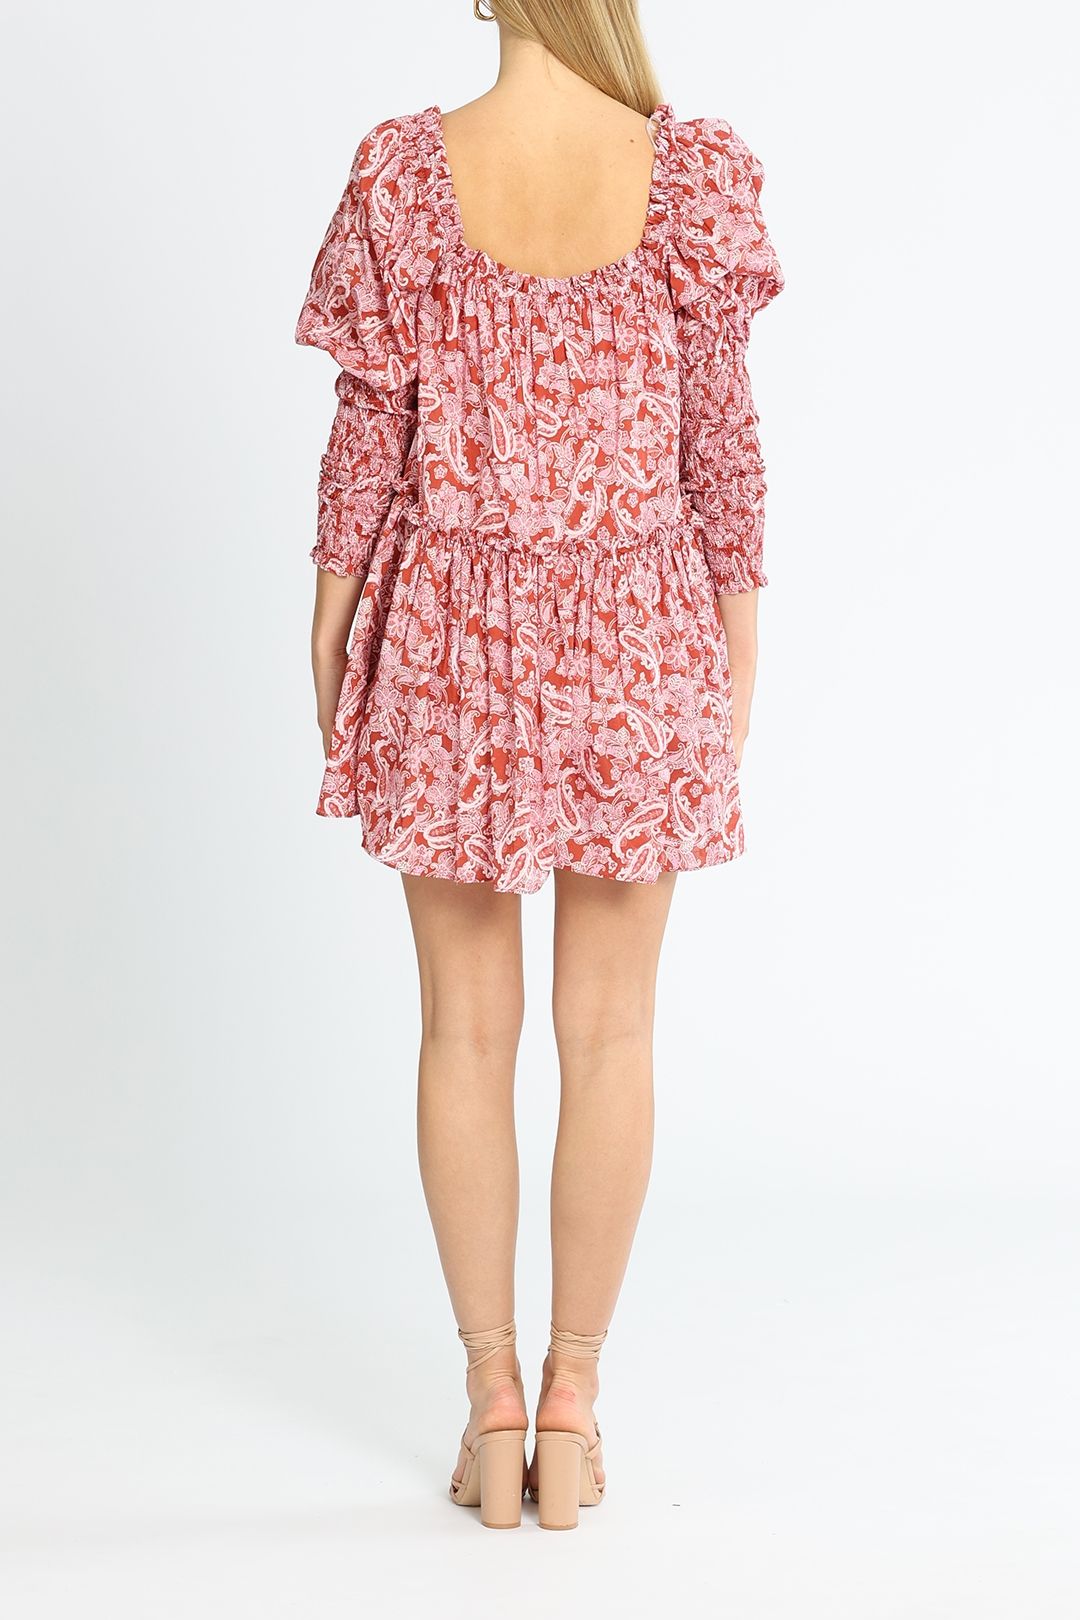 Steele Arden Dress Paisley Red